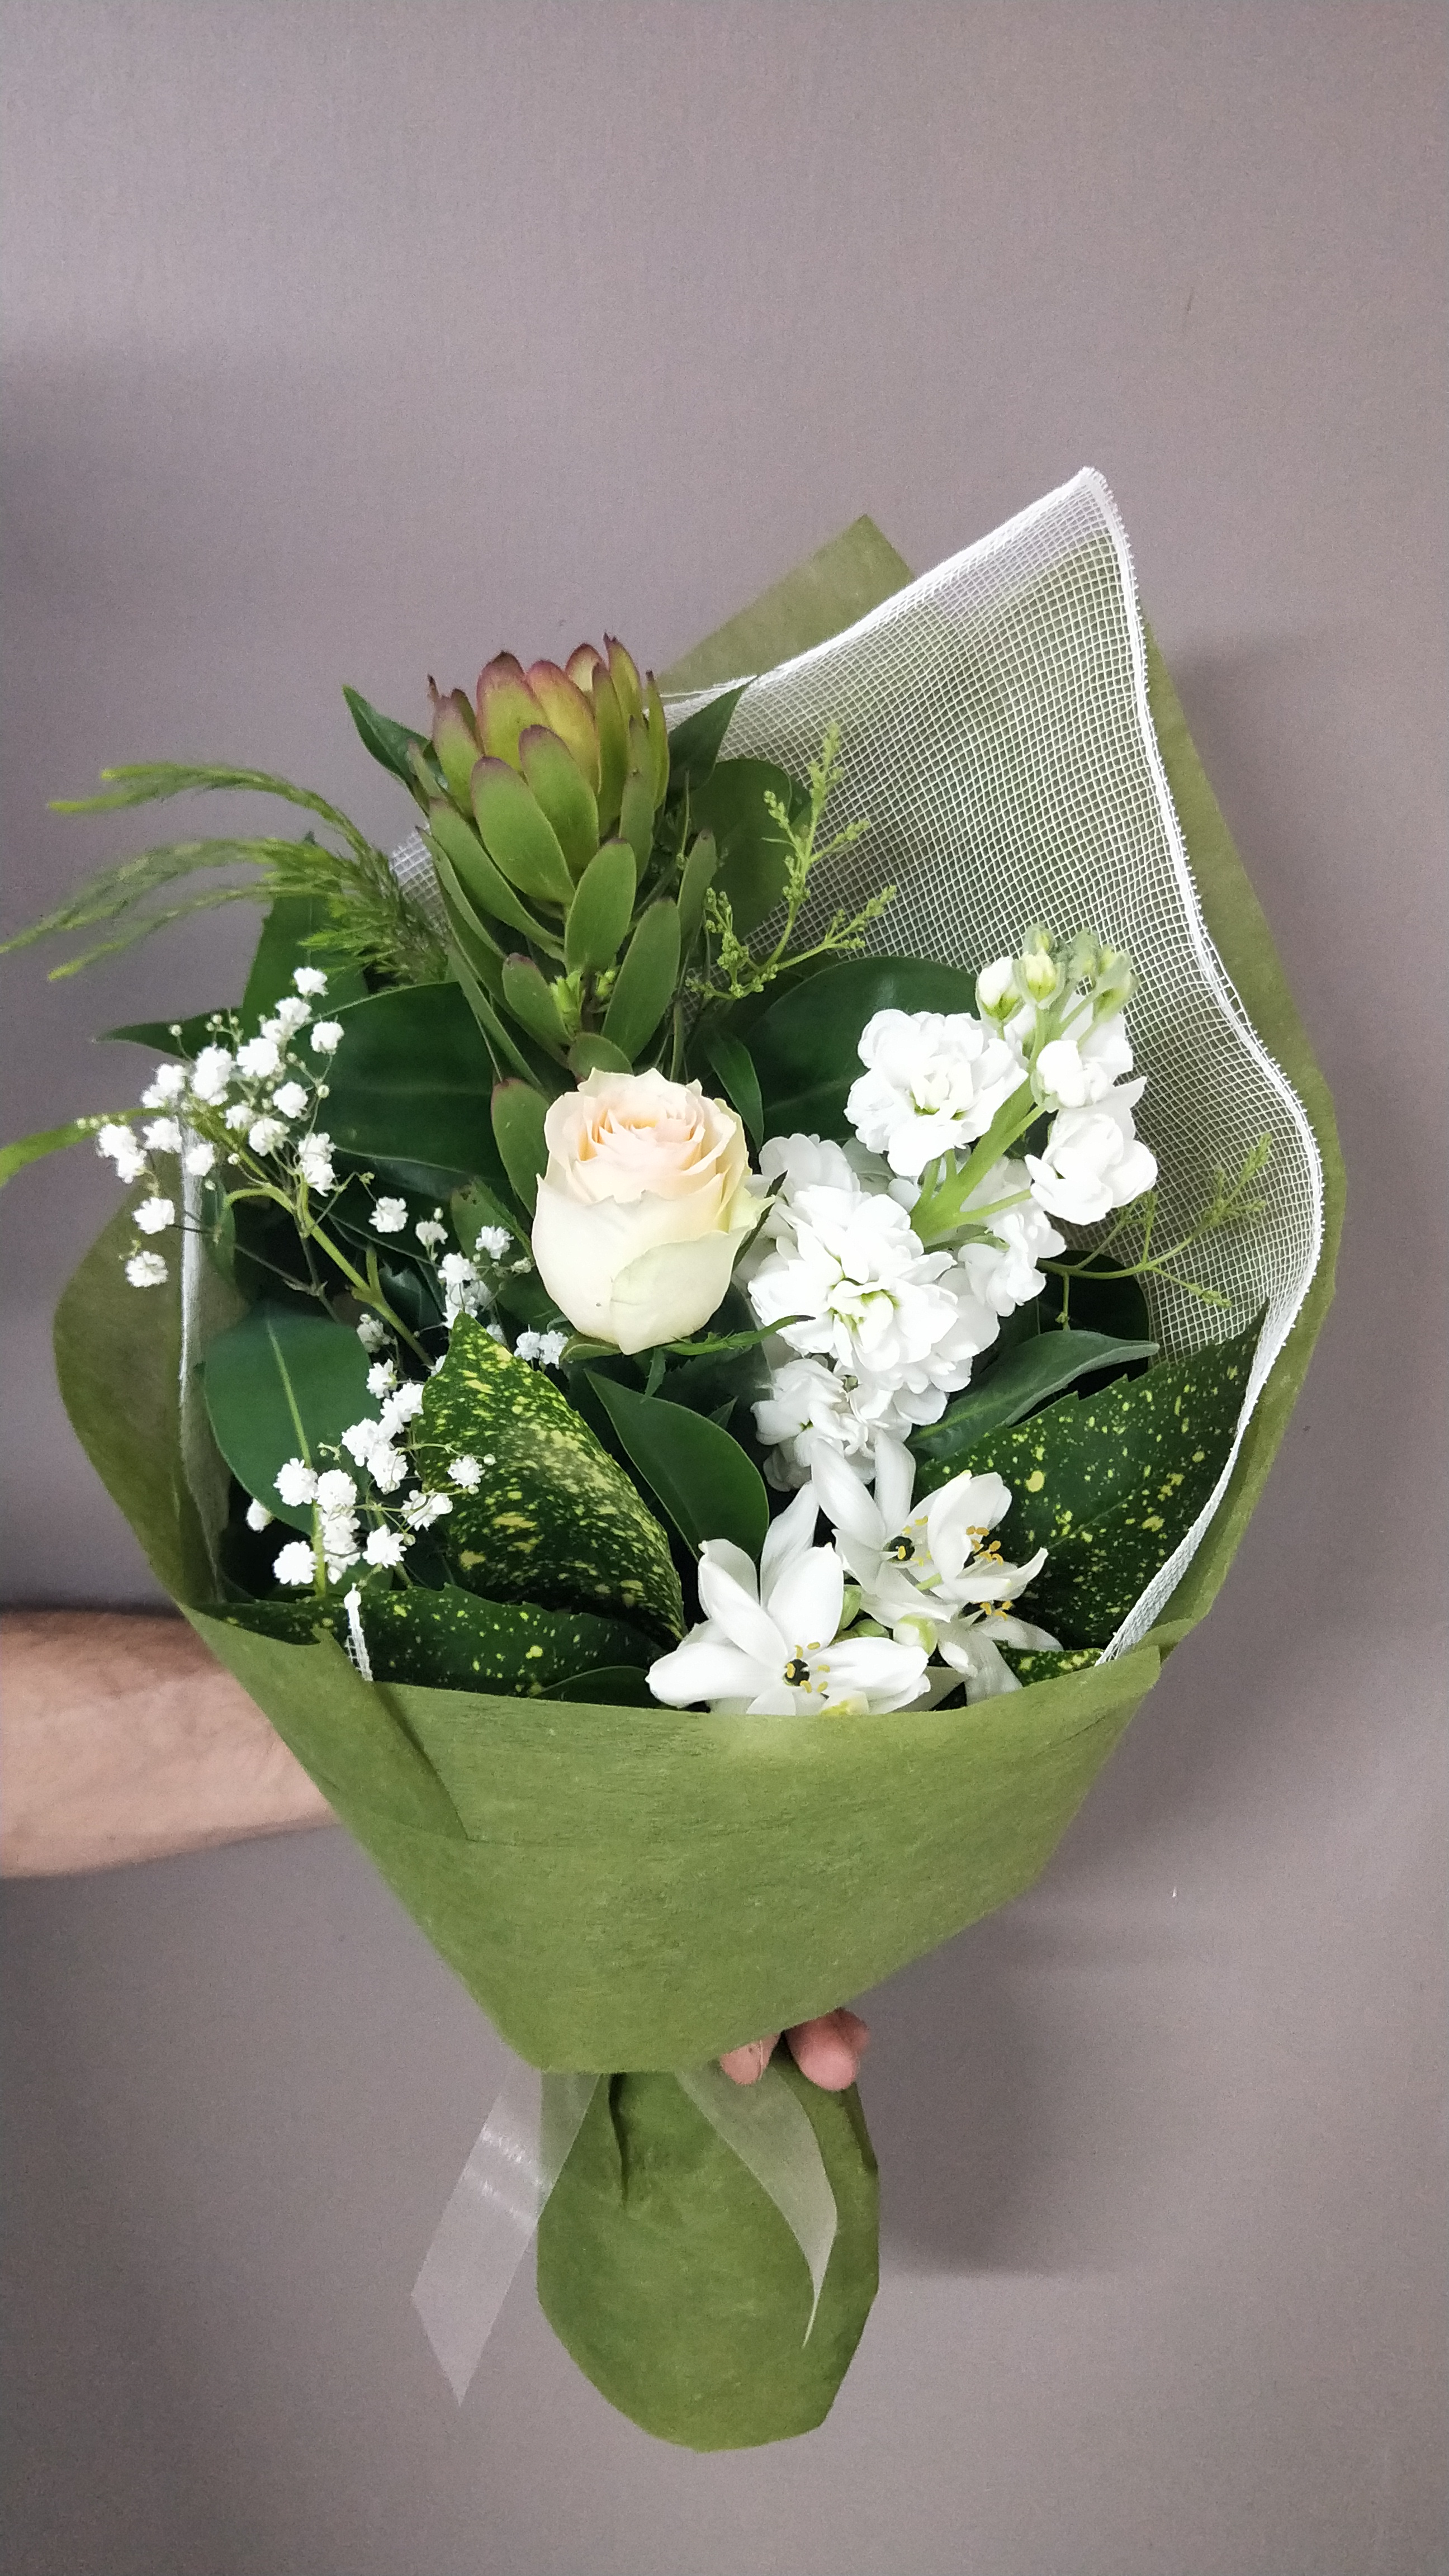 Adorable bouquet is an ideal gift for many occasions.